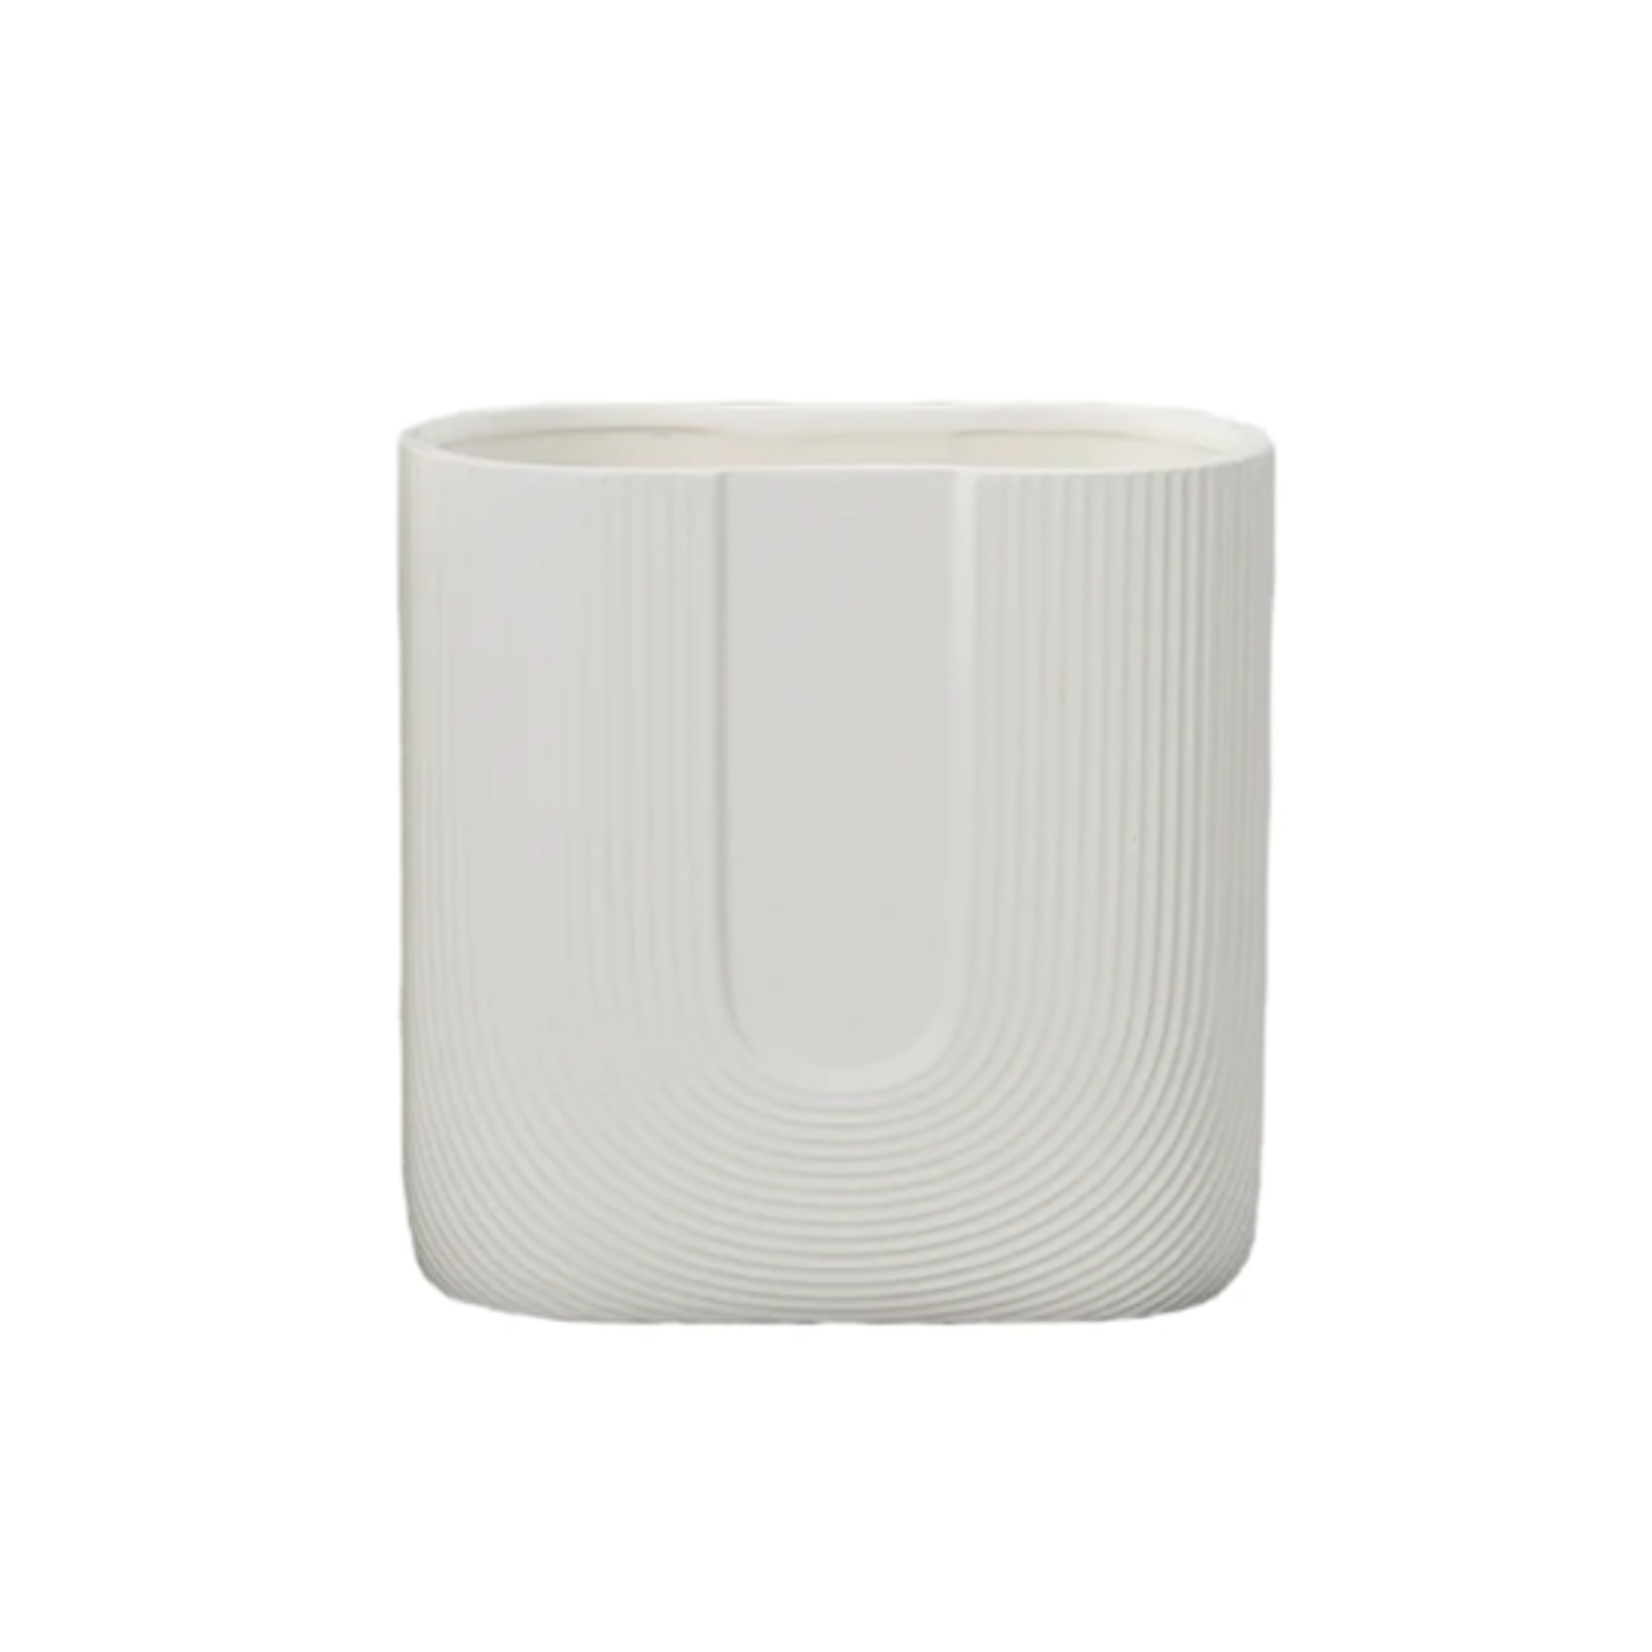 40% off was $22 now $11. 8”H X 8”L X 4”W GLOSSY WHITE CERAMIC OVAL POT WITH DEBOSSED INVERTED ARCH